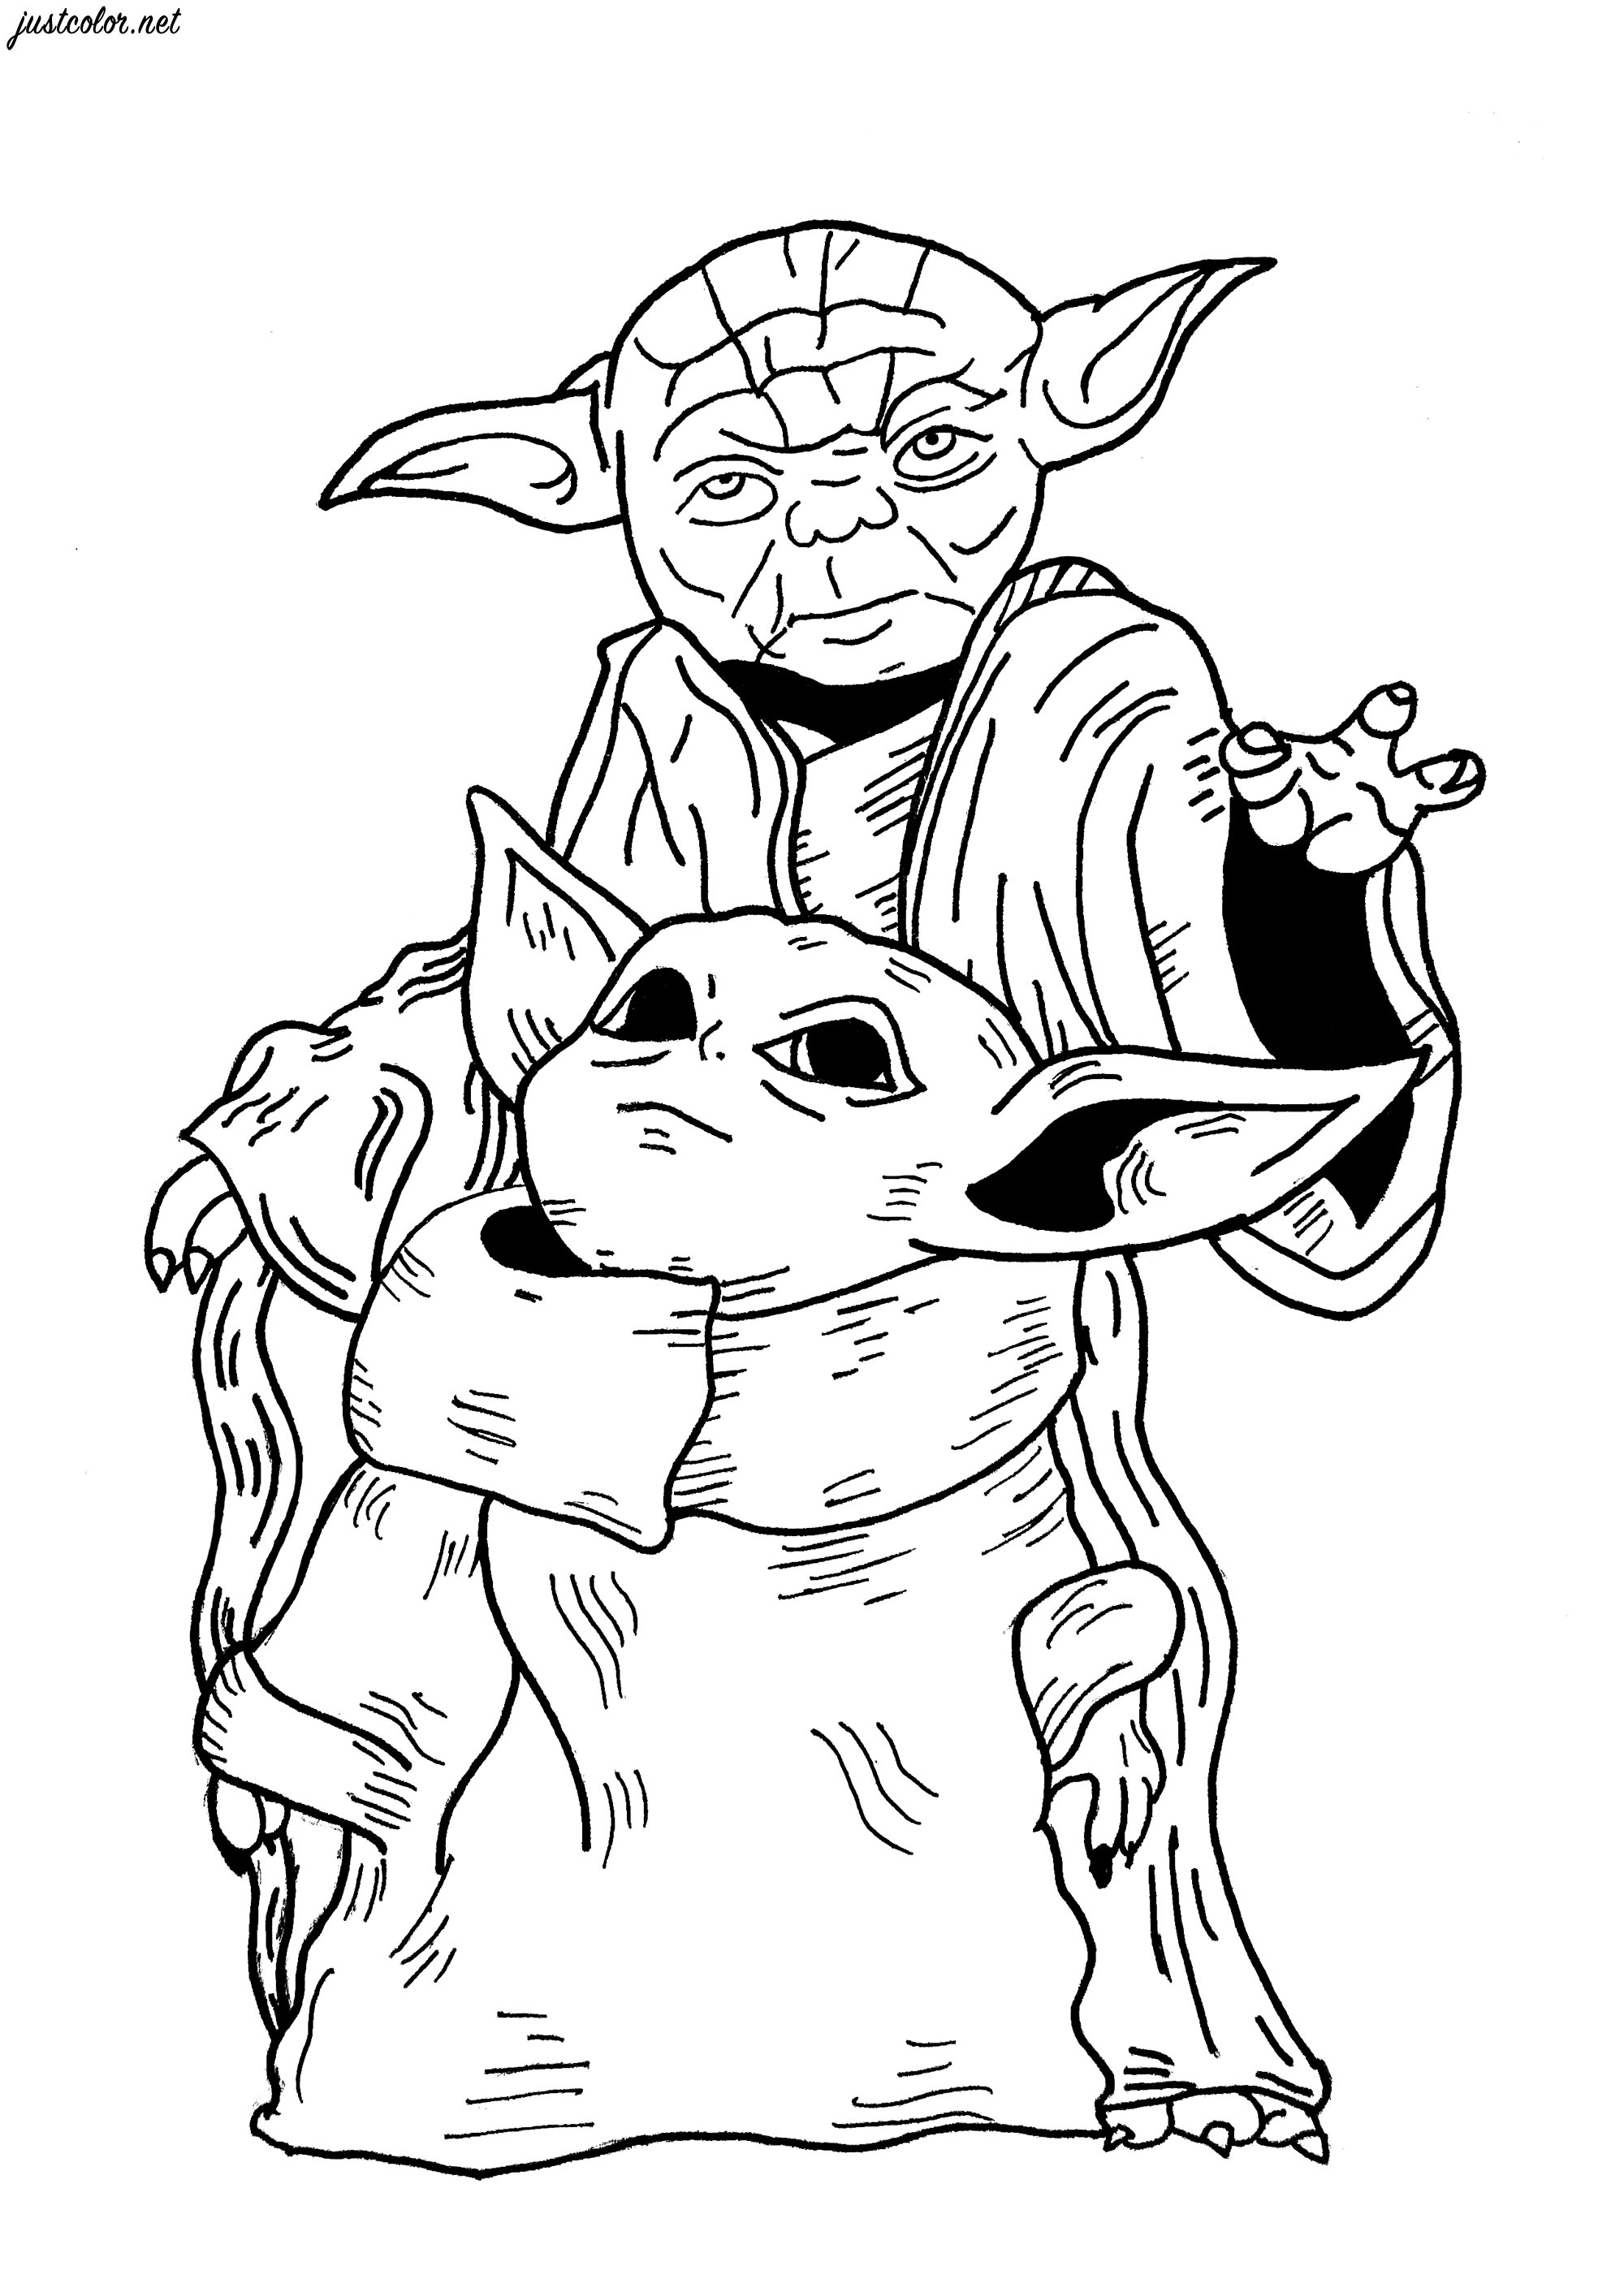 An original fan-art coloring page inspired by the characters of Grogu (Star Wars The Mandalorian series) and Master Yoda, Artist : Gamma